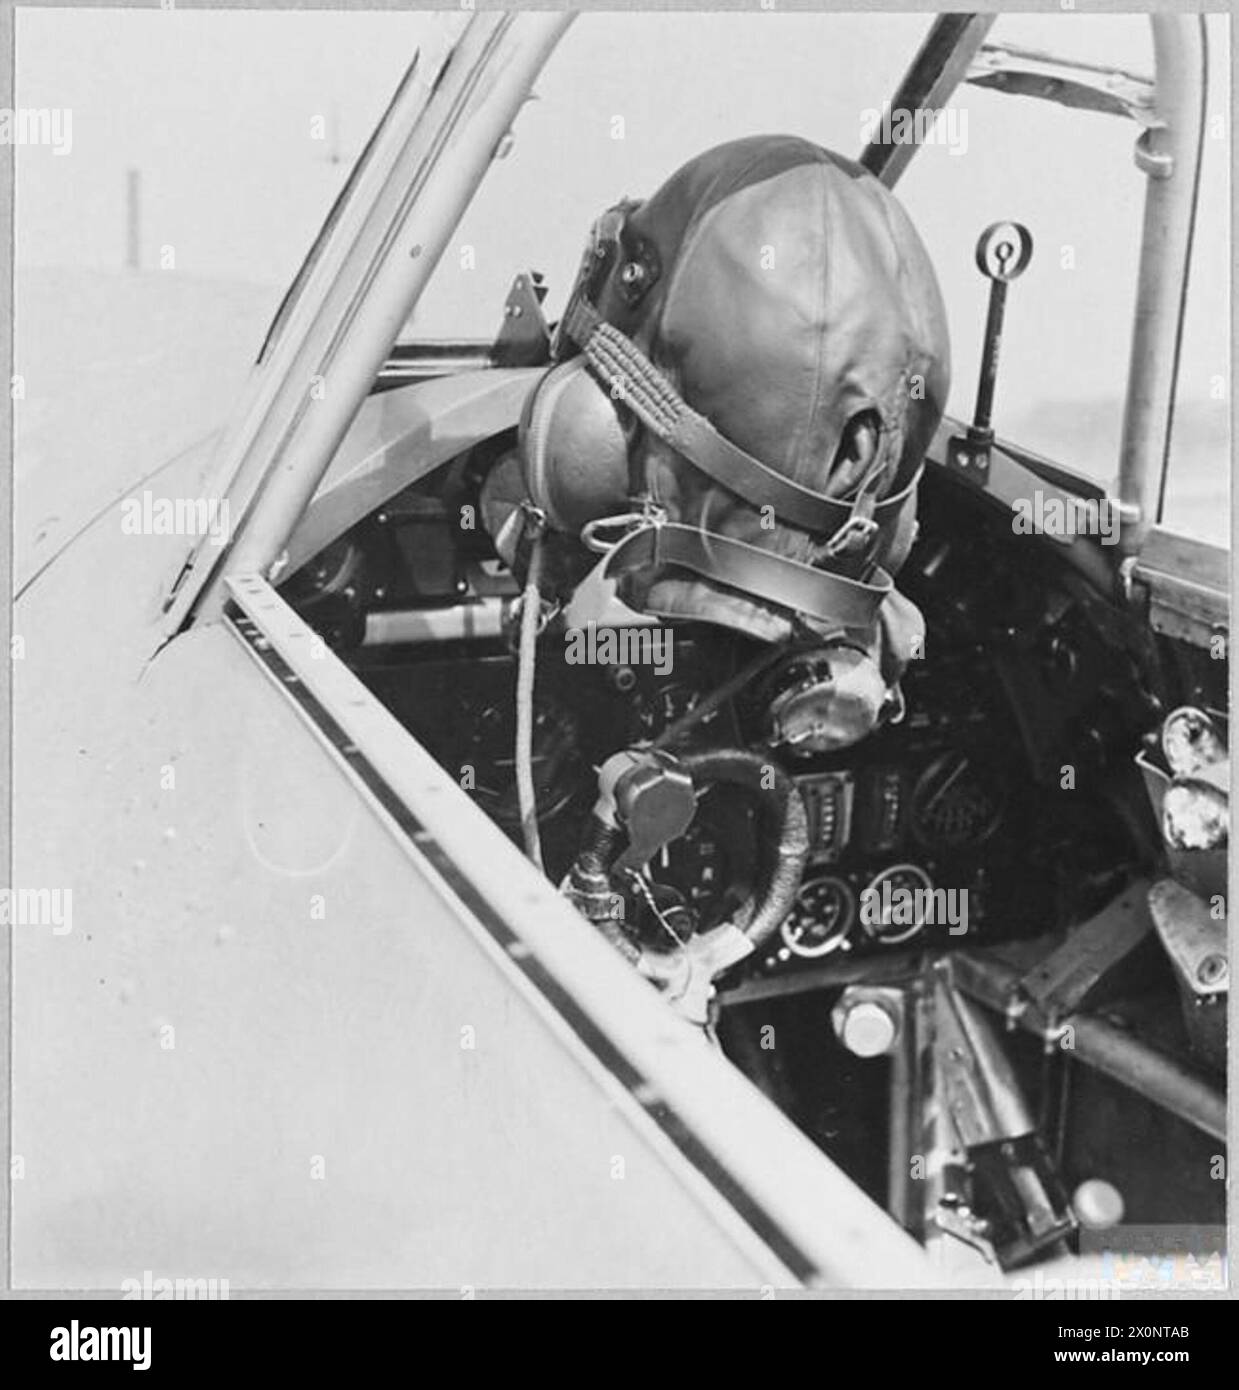 THE BATTLE OF THE ATLANTIC - 'Still' life. The pilot's helmet hangs near the control column. Photographic negative , Royal Air Force Stock Photo